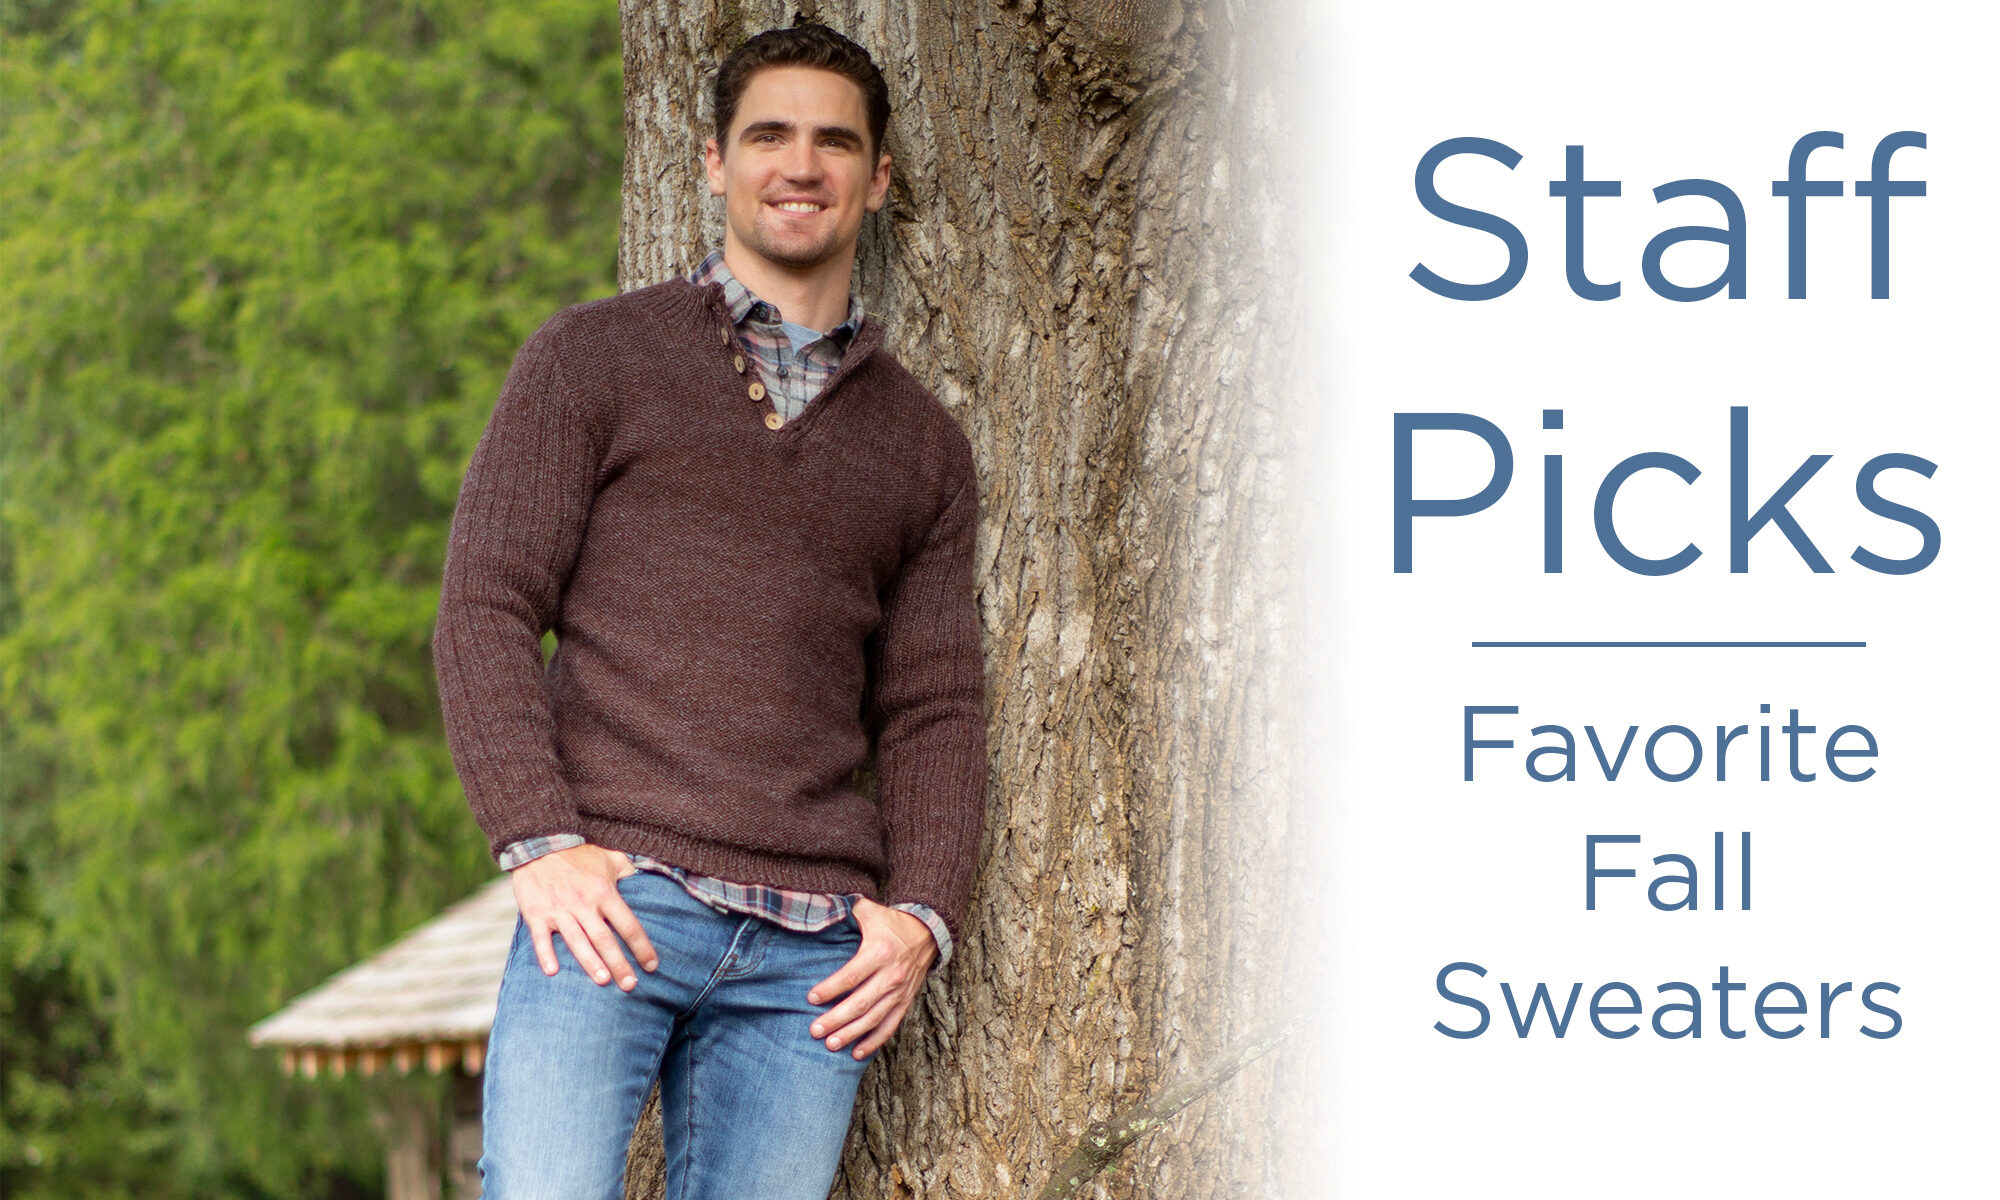 A man leans against a tree modeling a brown, knit sweater. Text on the image reads "Staff Picks. Favorite Fall Sweaters."